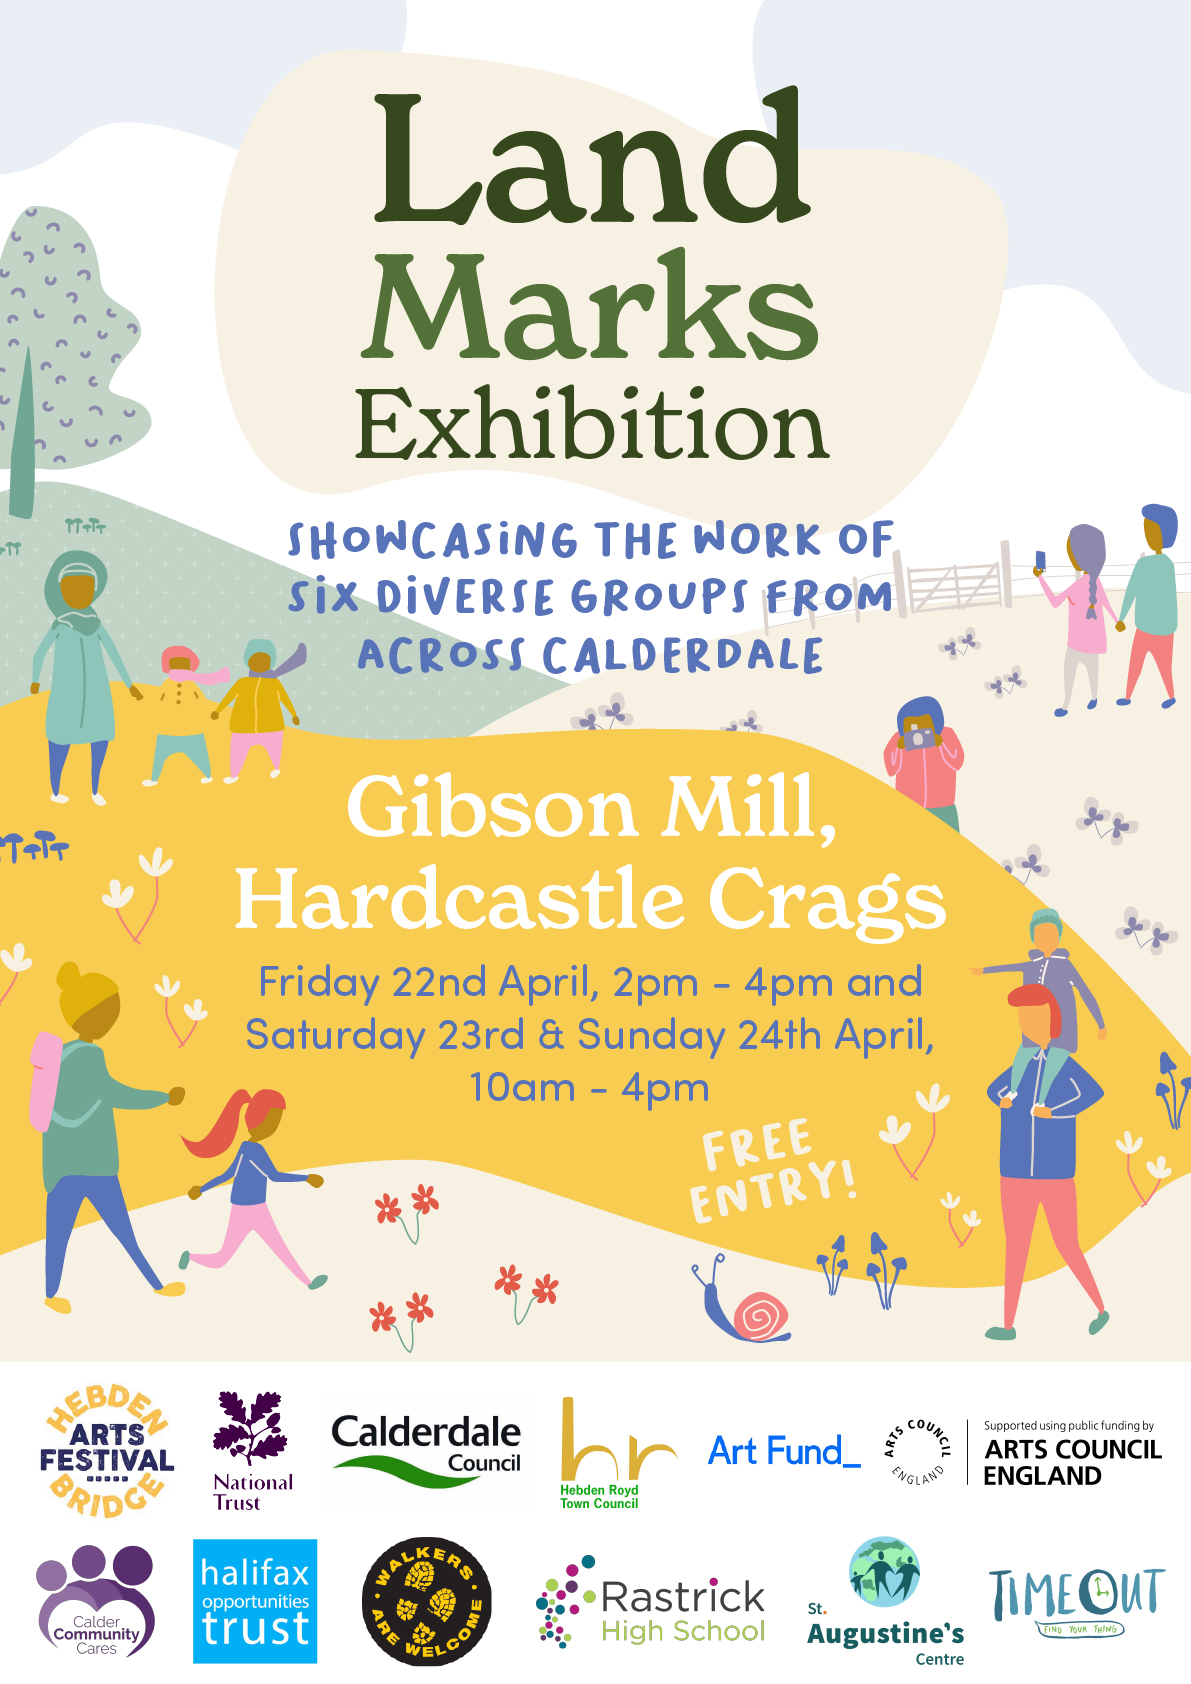 Hebden Bridge Arts Festival – Land Marks exhibition at Gibson Mill 22nd – 24th April